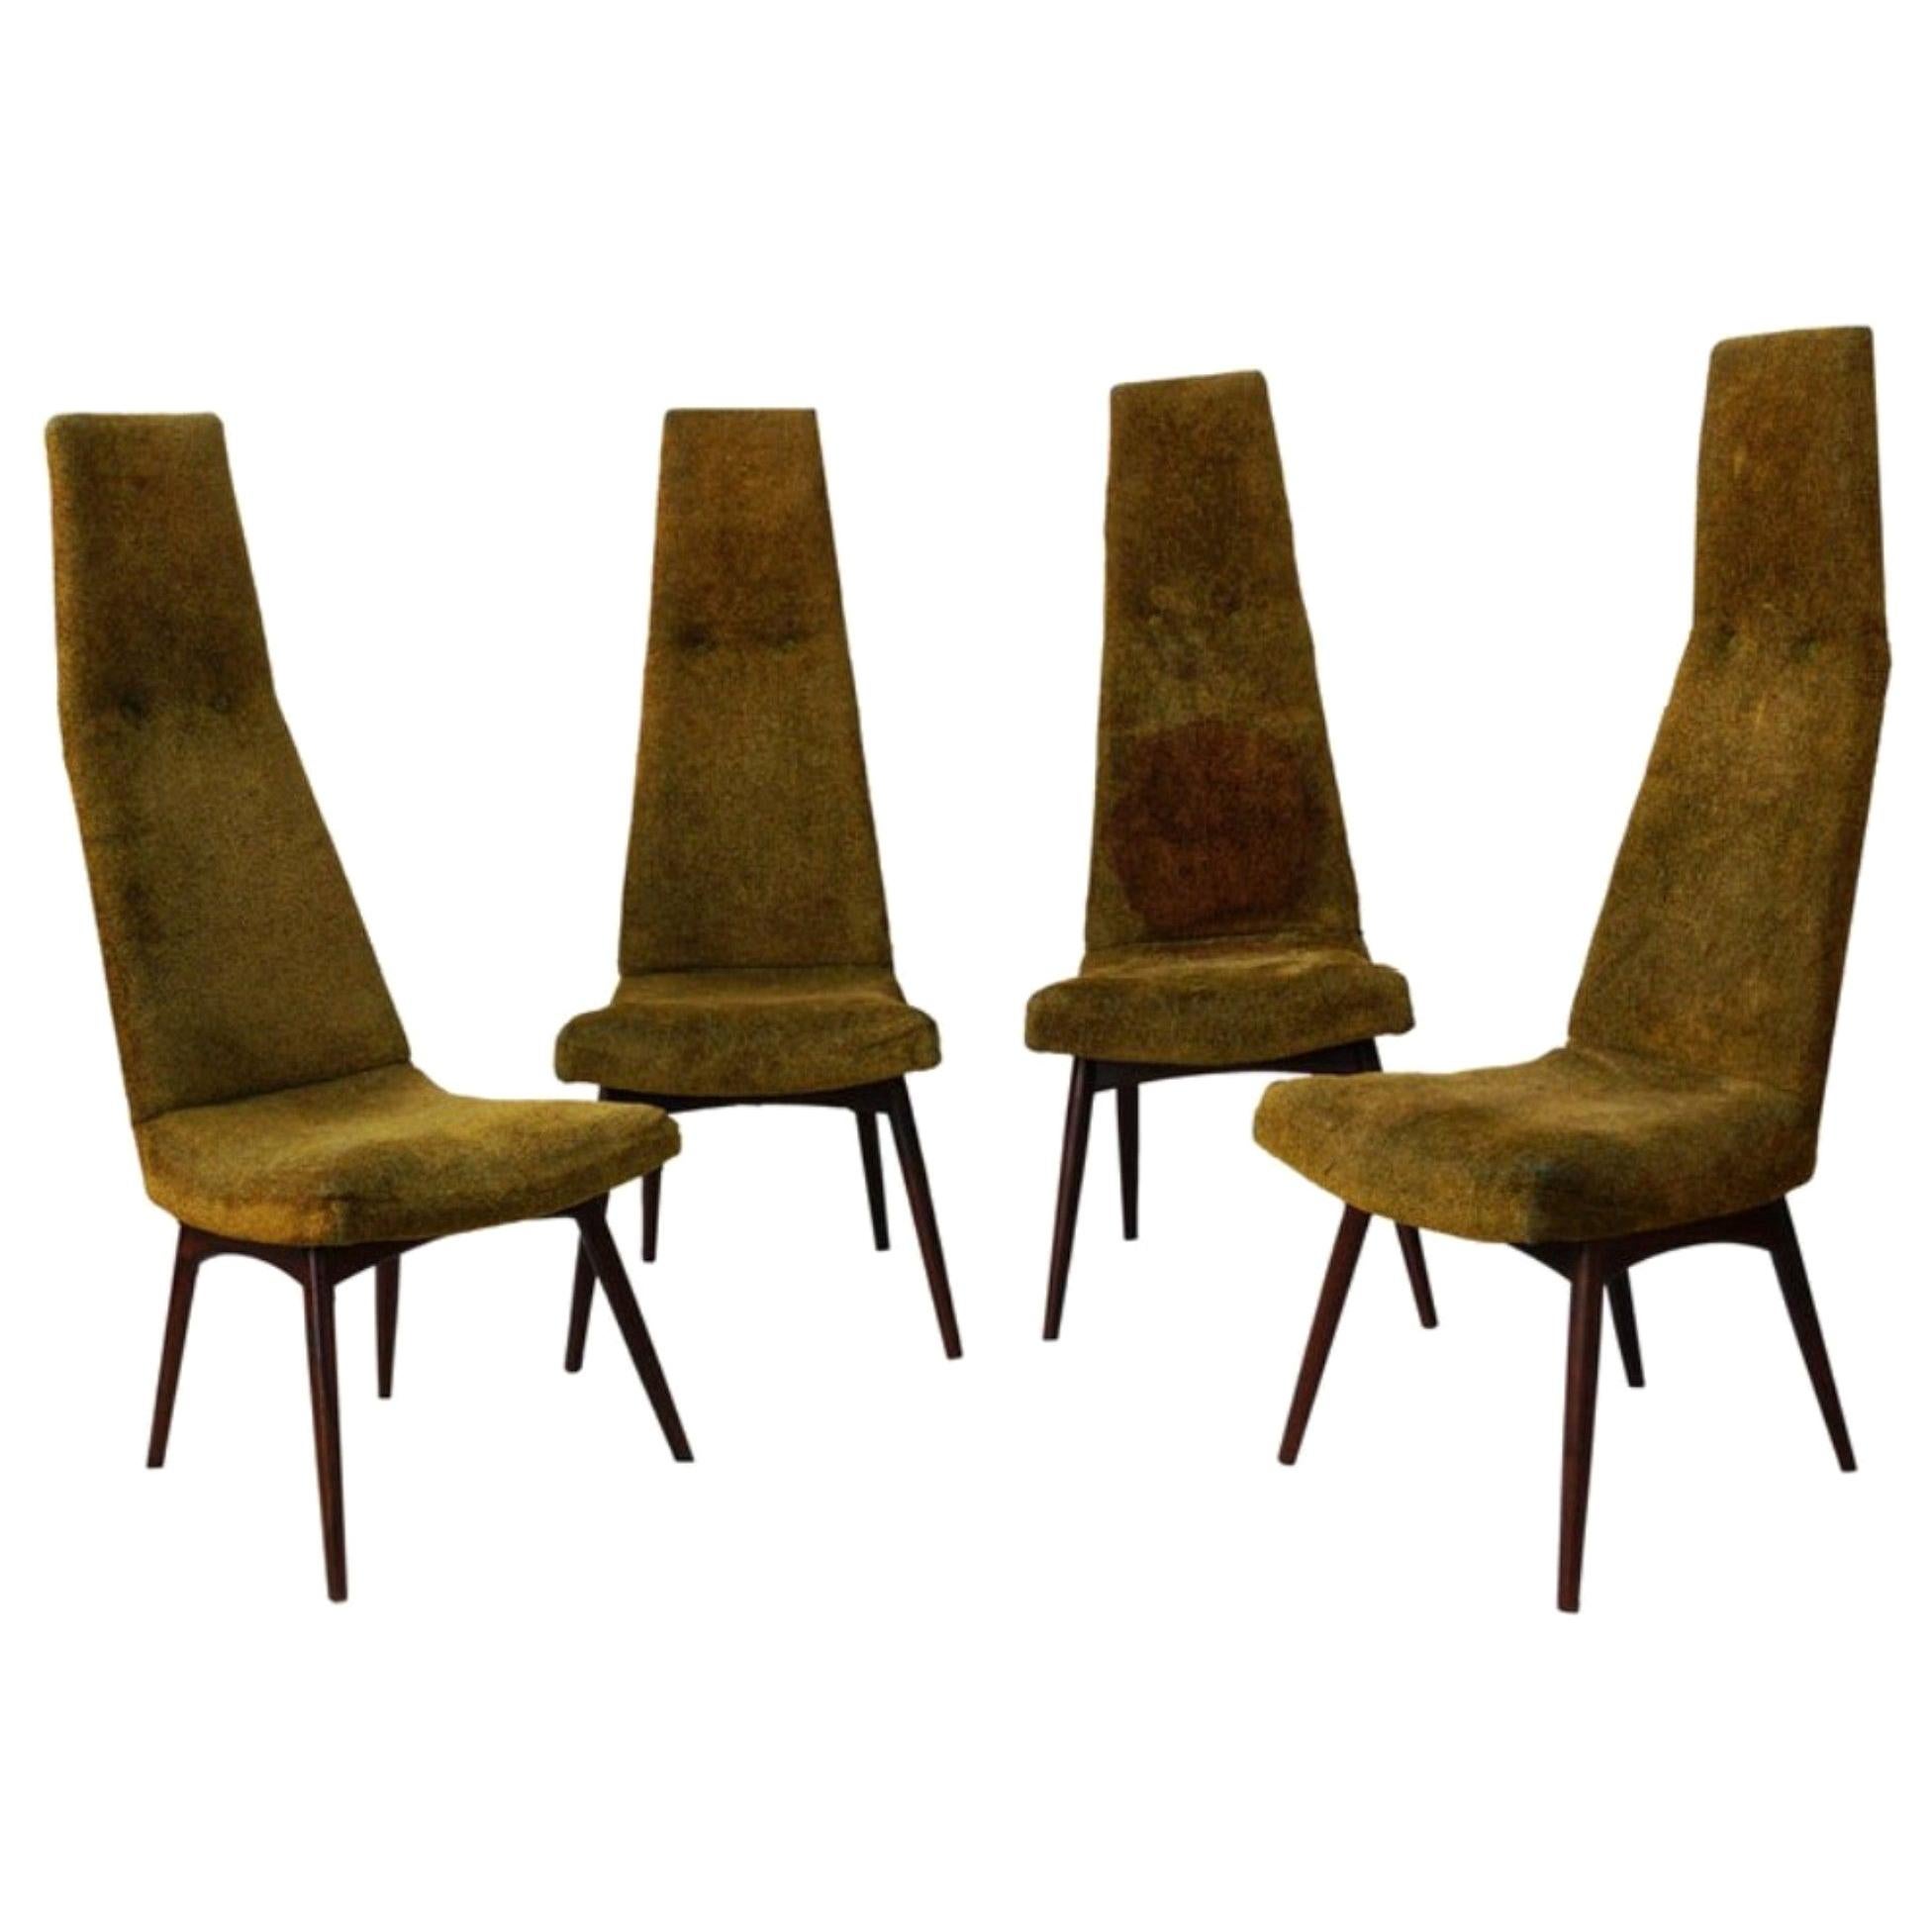 Set of Four Adrian Pearsall High Back Dining Chairs for Craft Associates